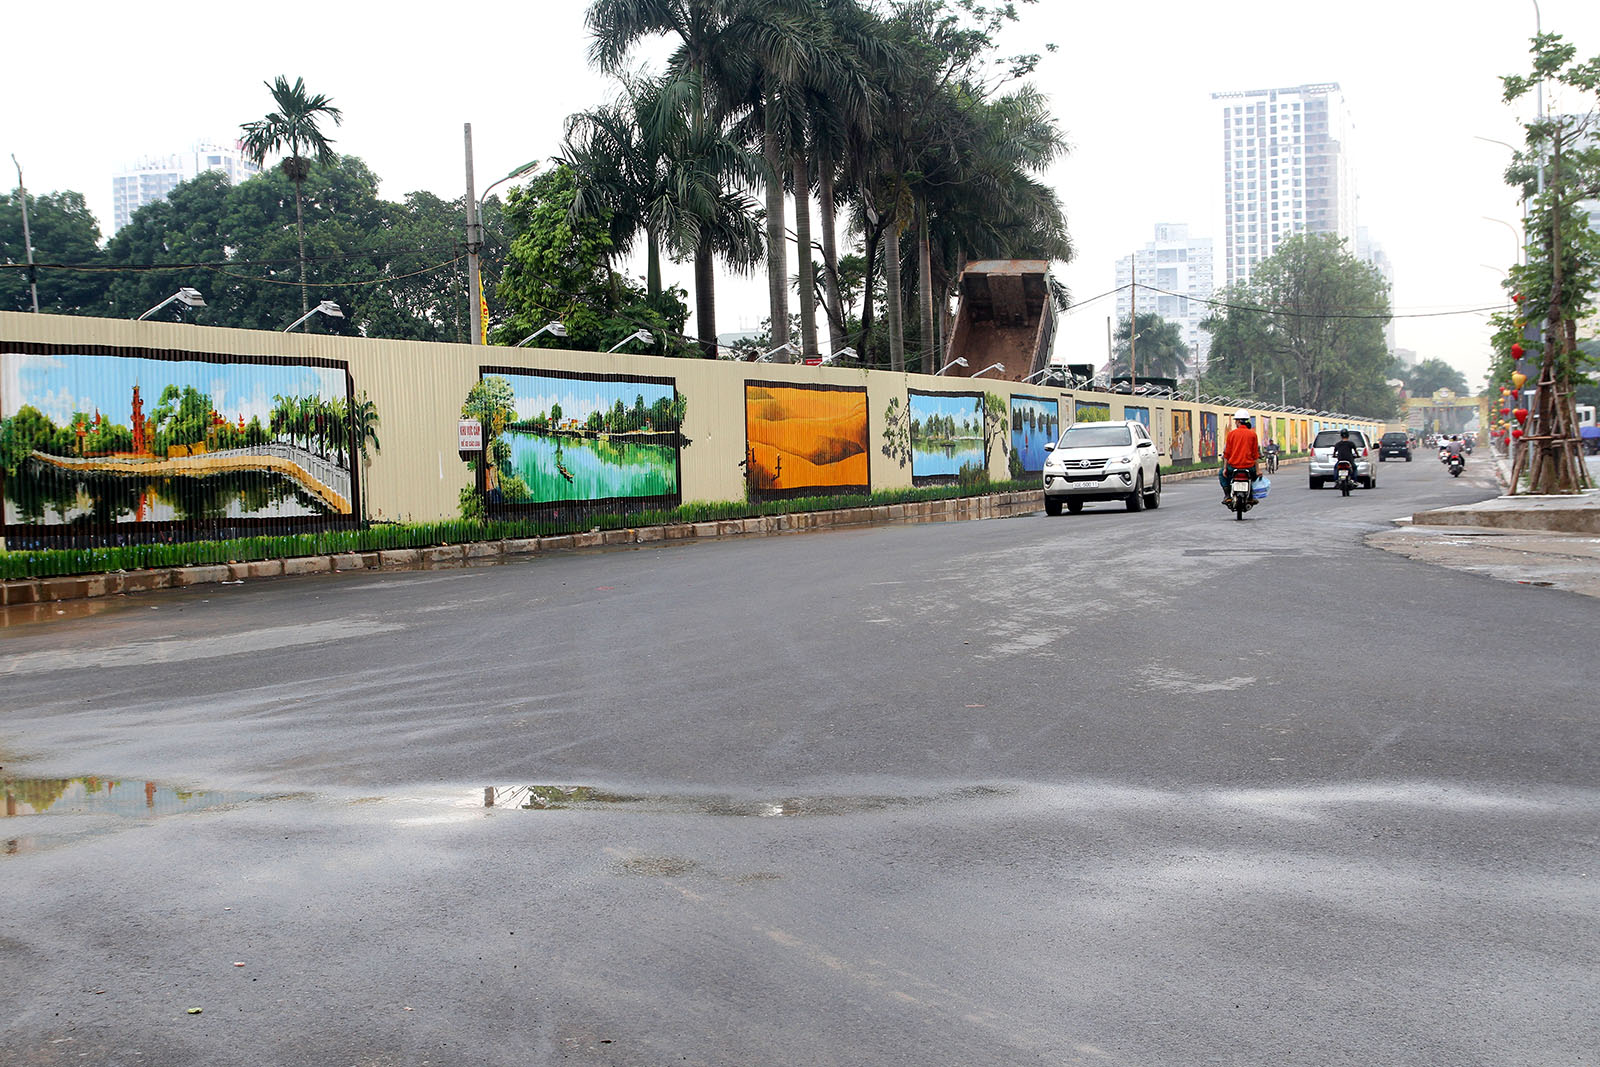 The 3D paintings are done on metal sheets along the entrance to the Goldmark City condominium in Hanoi. Photo: Tuoi Tre